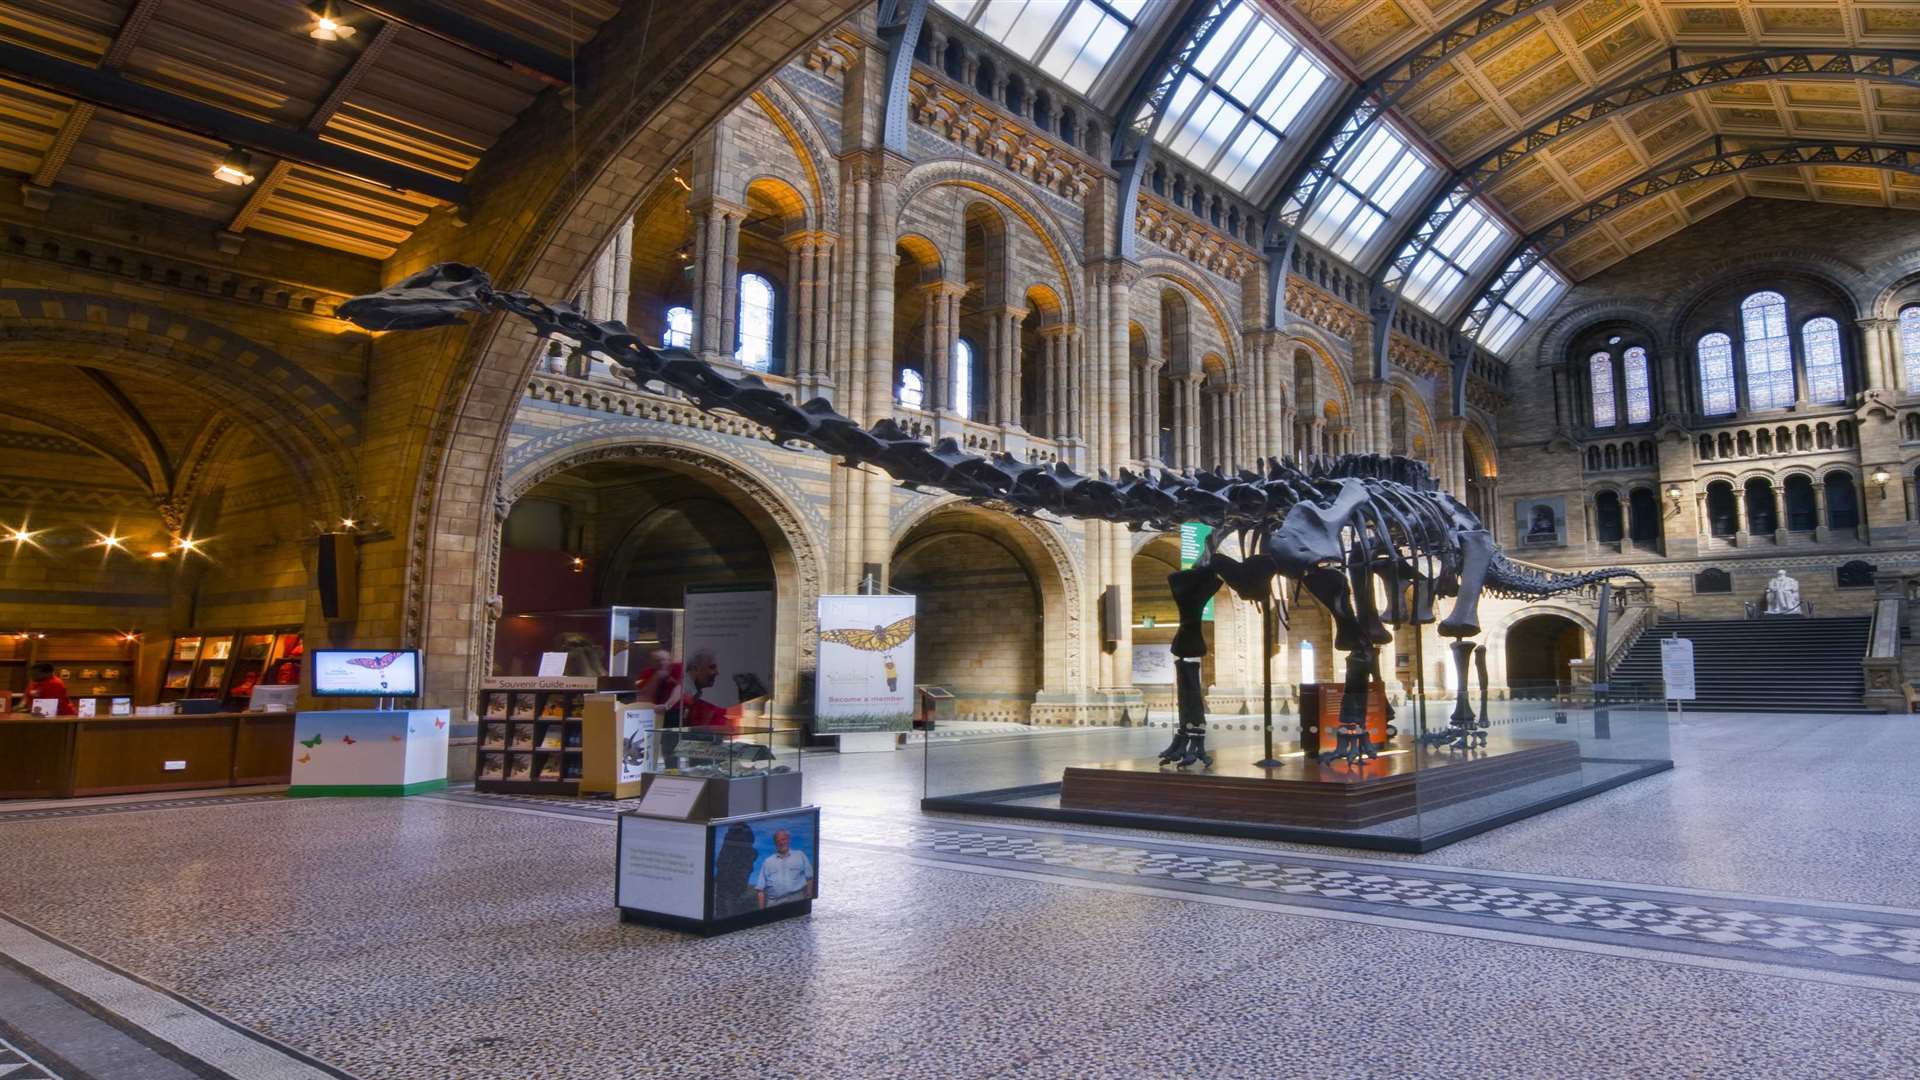 Dippy the Diplodocus has welcomed visitors for 35 years